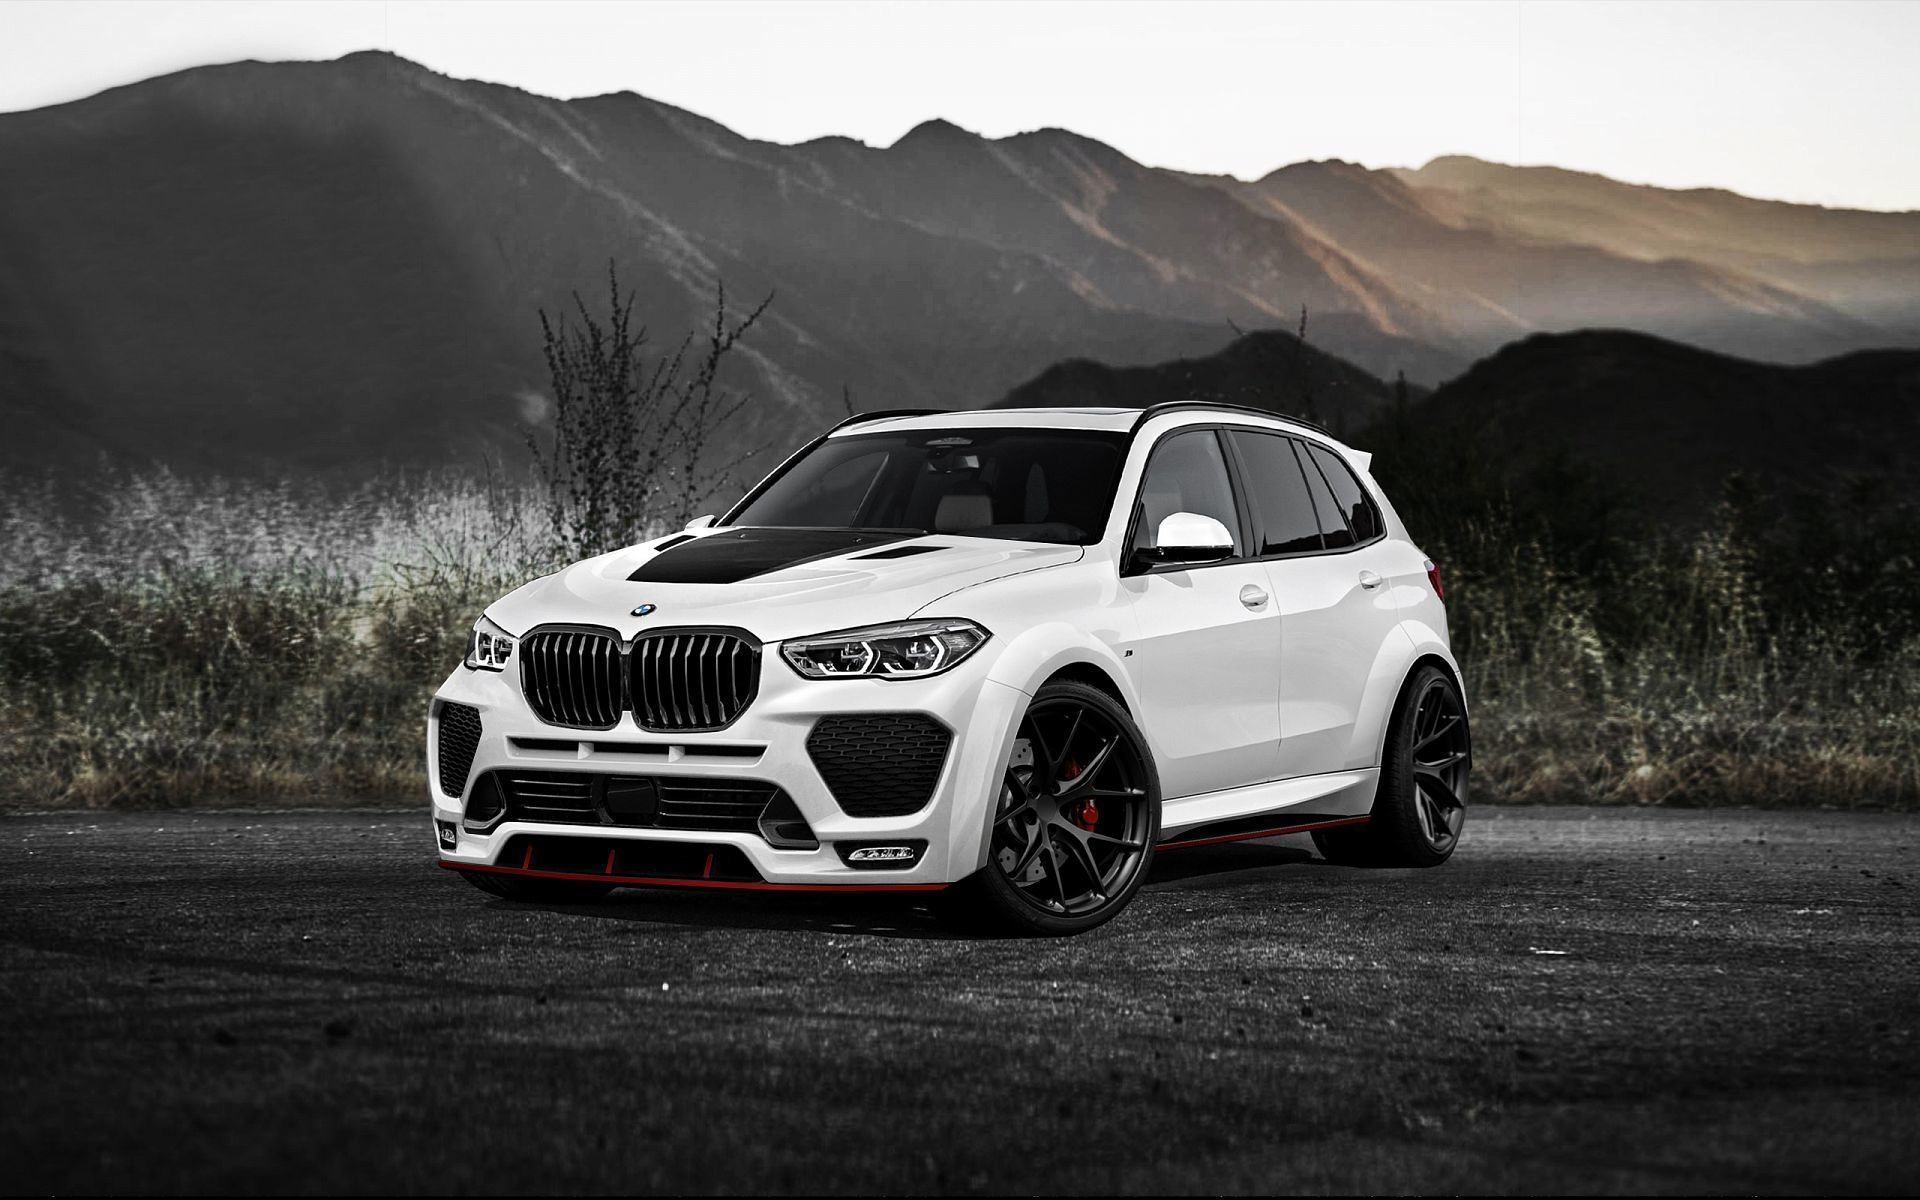 Renegade body kit for BMW X5 G05 new model